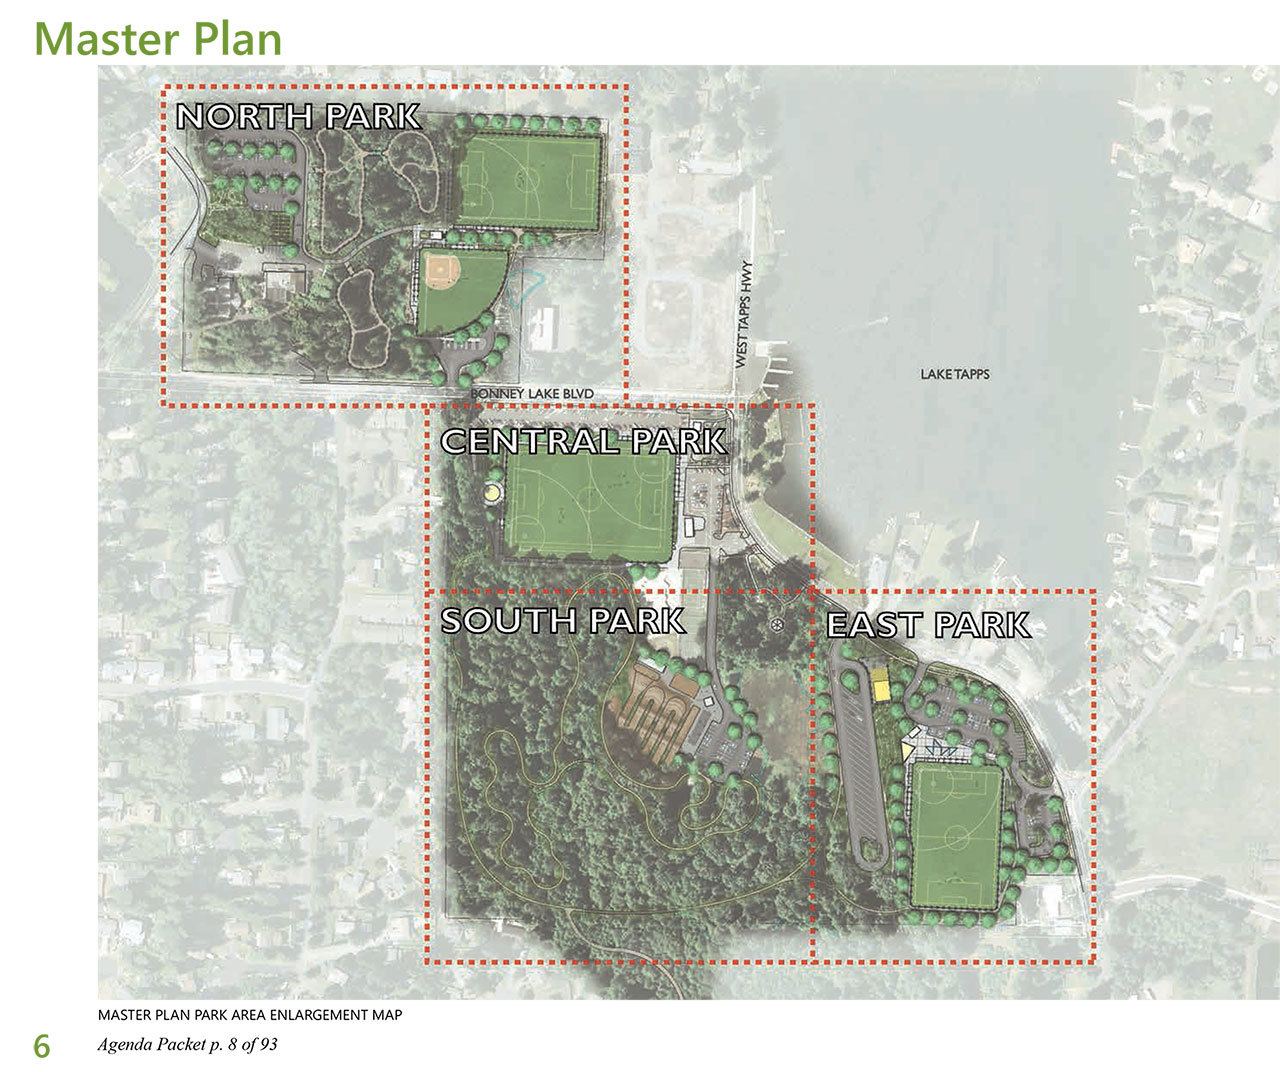 Phase 1 of the Allan Yorke Park makeover will include many changes happening to East and South Park. Image courtesy of the city of Bonney Lake.